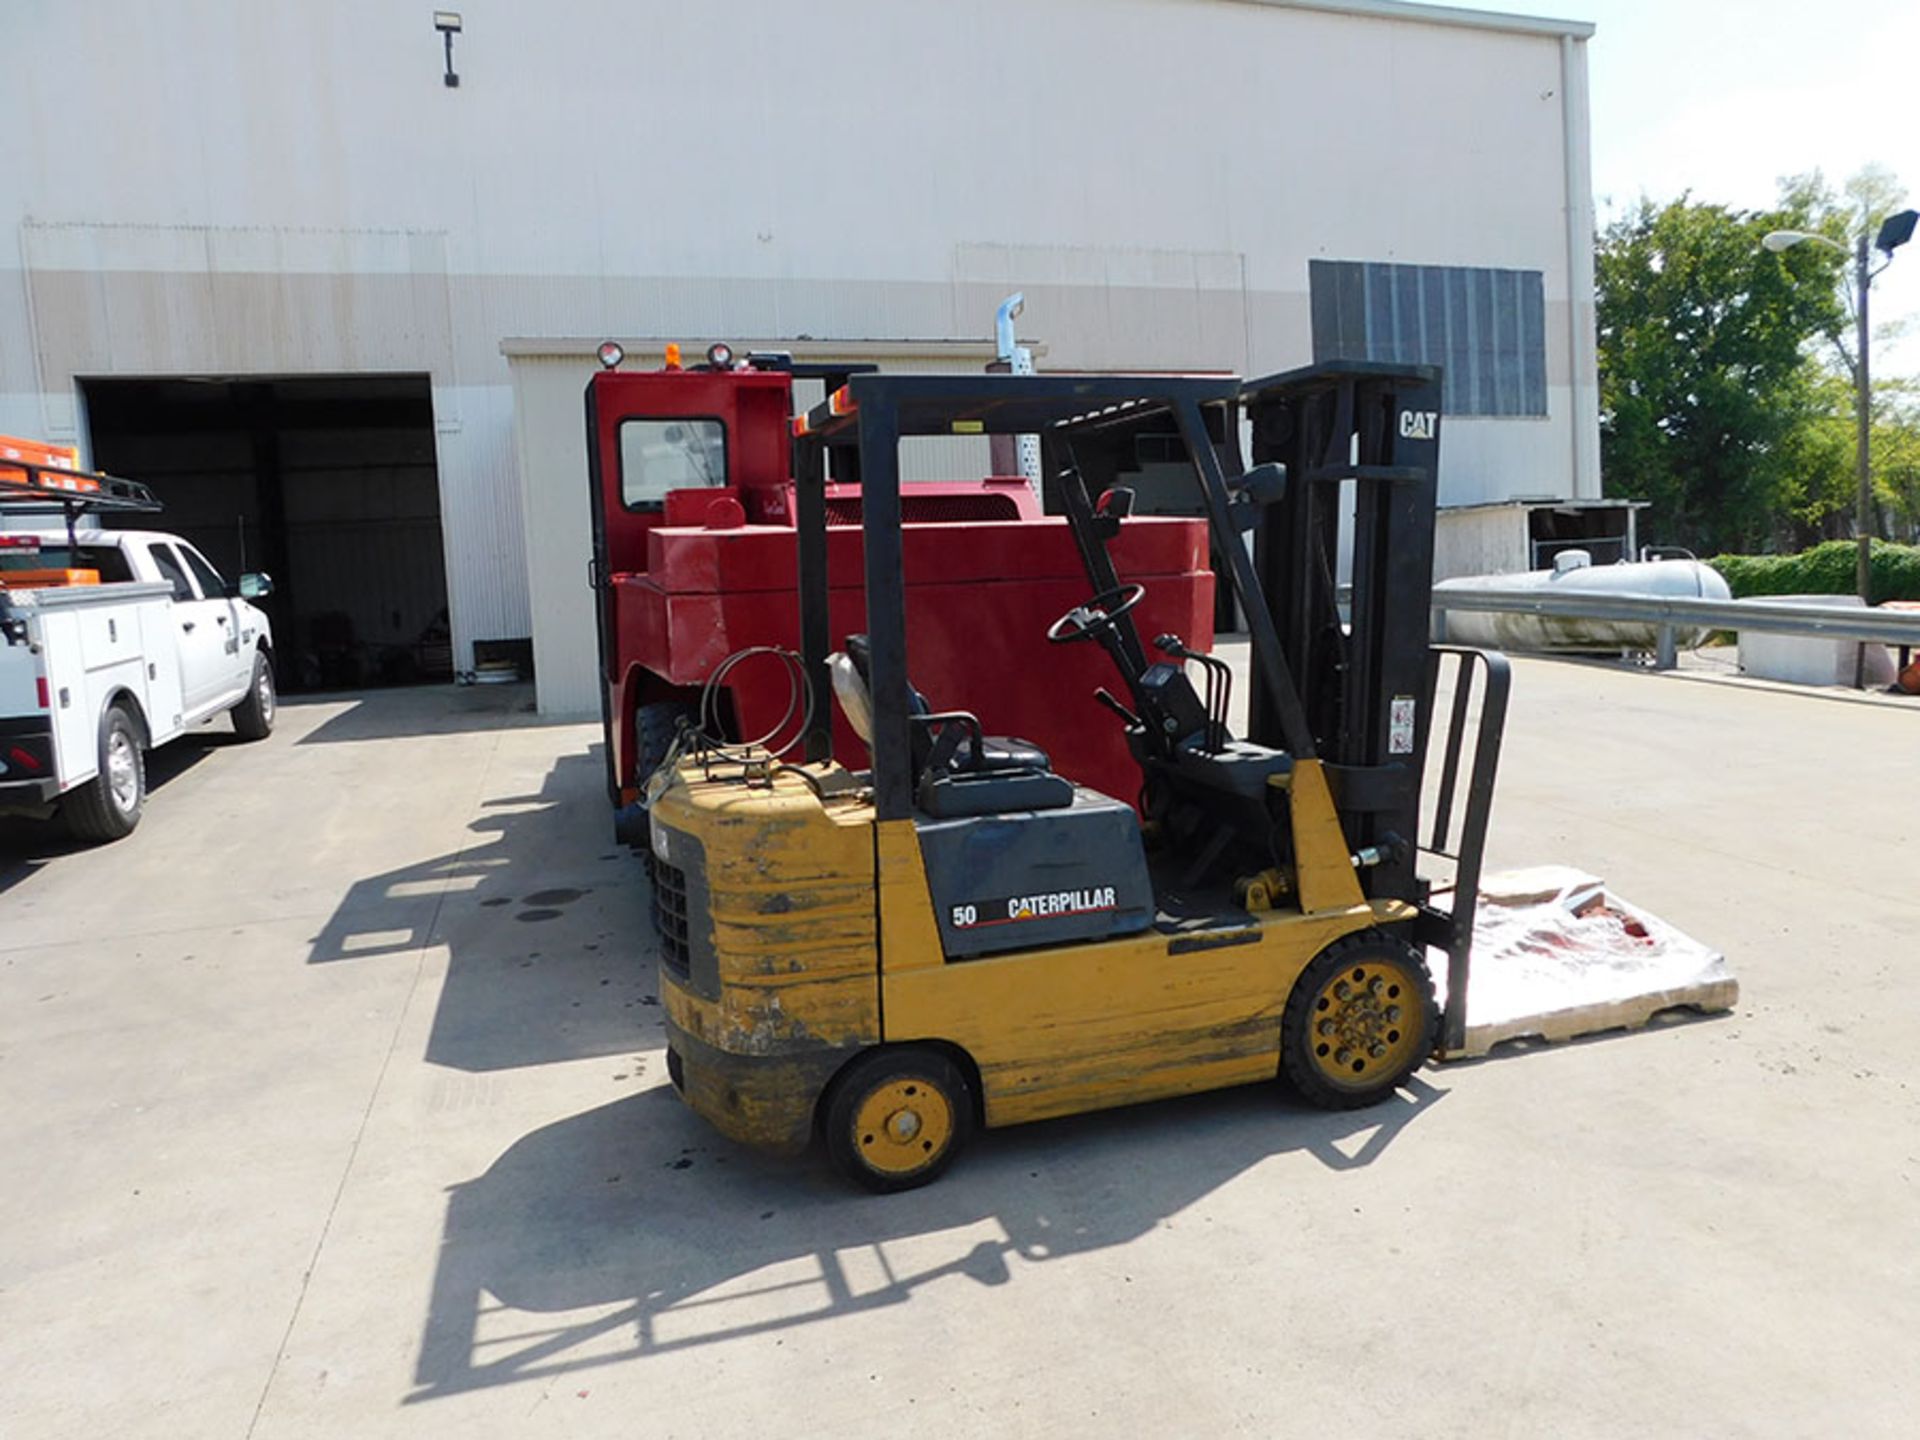 CATERPILLAR GC25 5,000 LB. FORKLIFT; 3-STAGE MAST, 189'' LIFT HEIGHT, LP GAS, SOLID TIRES, 42'' - Image 2 of 2